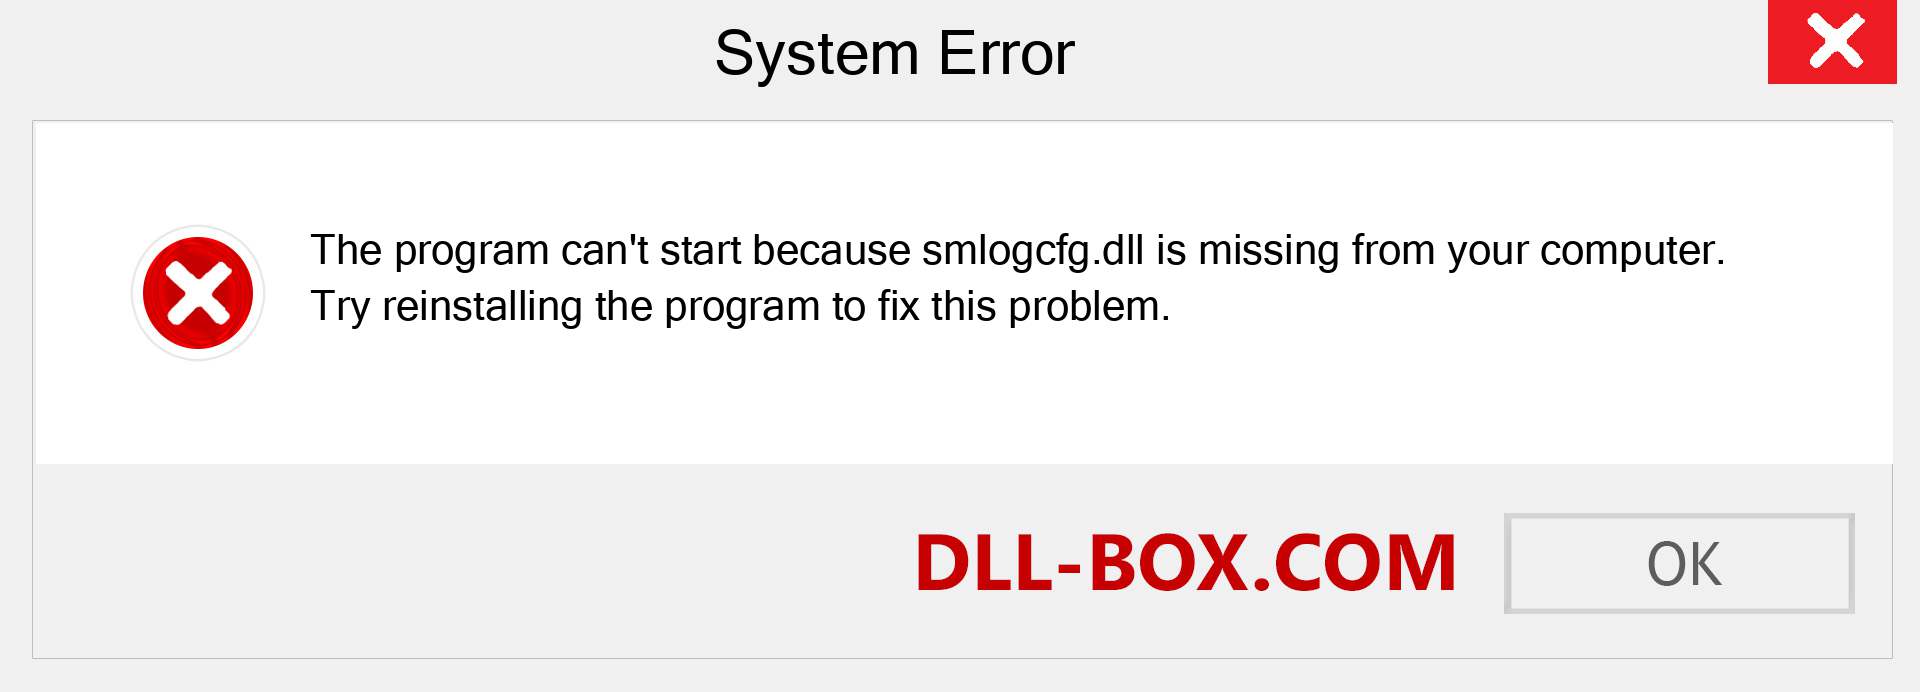  smlogcfg.dll file is missing?. Download for Windows 7, 8, 10 - Fix  smlogcfg dll Missing Error on Windows, photos, images